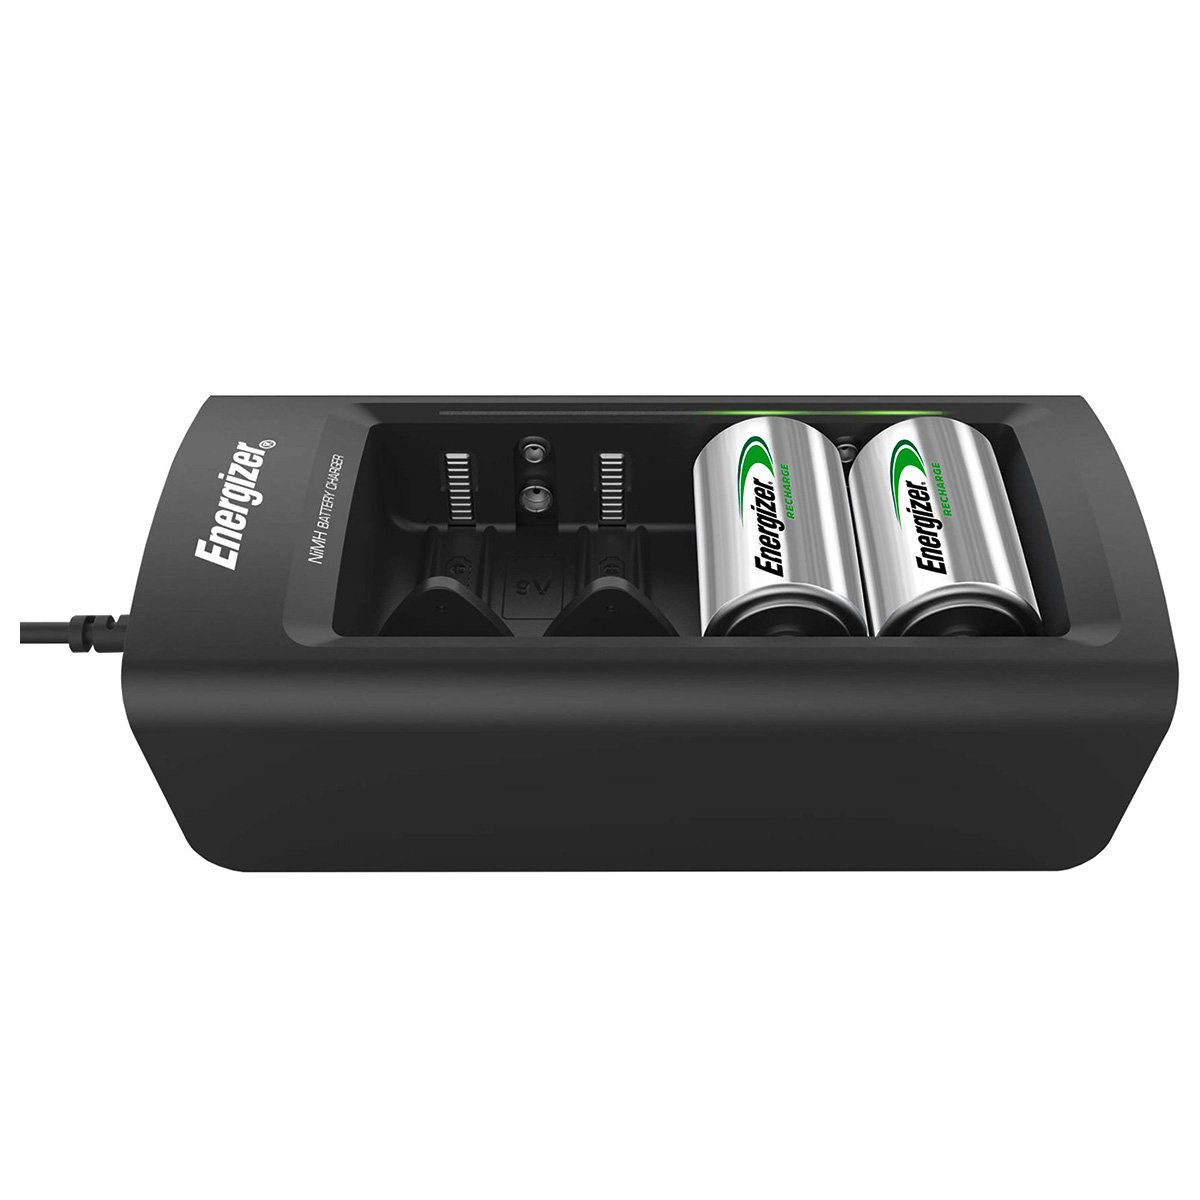 Energizer battery charger Accu Recharge Universal for 4 batteries, size AA, AAA, C, D, 9V